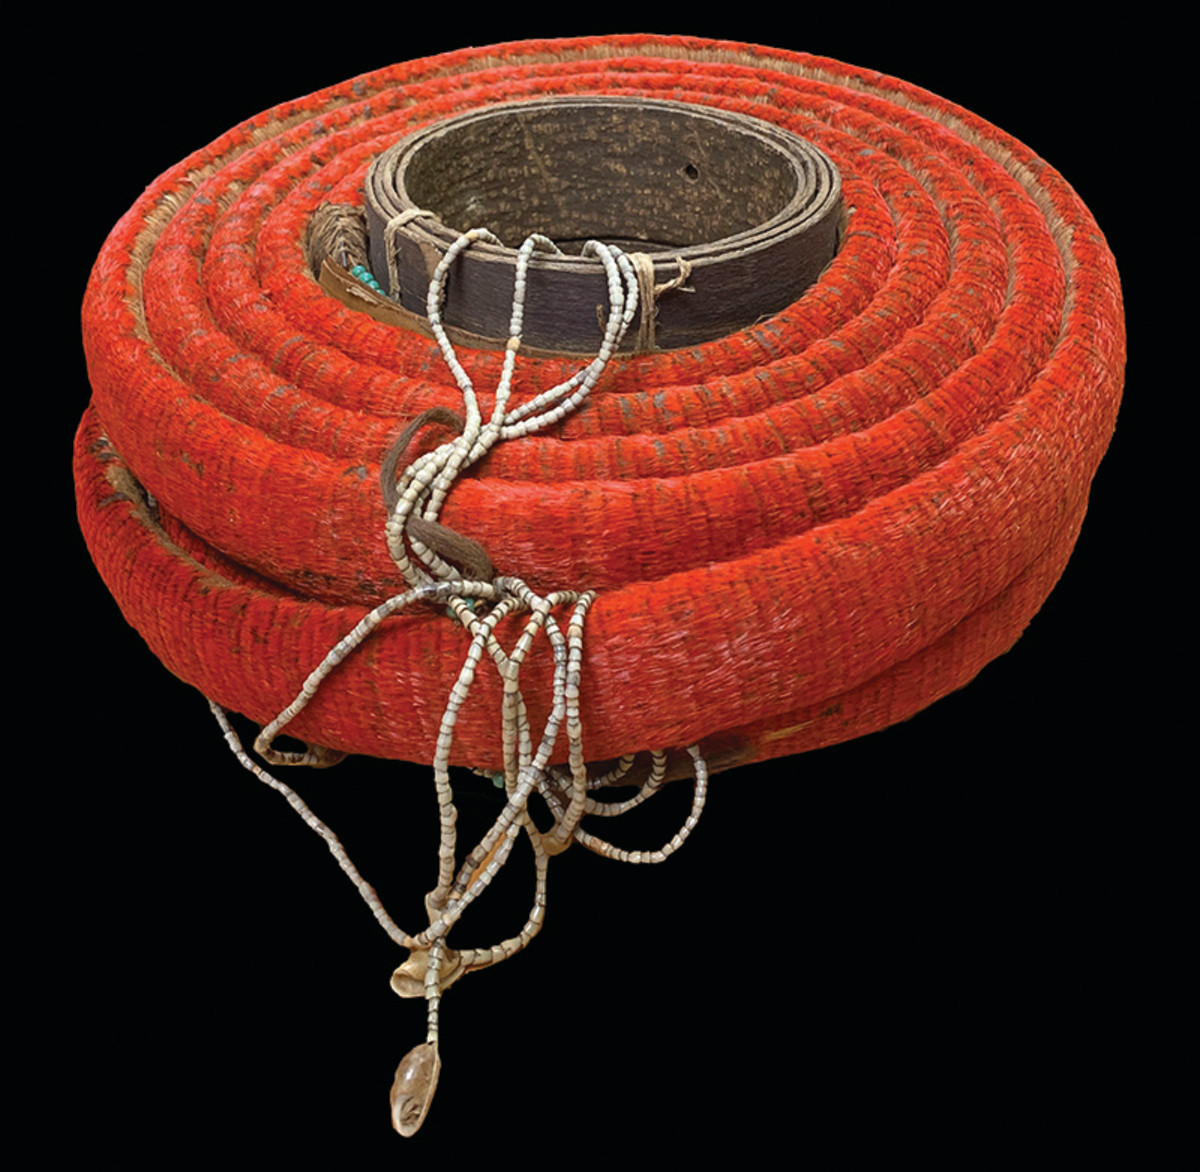 SOLOMON ISLANDS: Santa Cruz Islands, feather coil money (3519g), 19th to early 20th century, Opitz p.142-43, Knox p.50, ca. 8.17m (26'-9½") long and 5cm wide (2"), rolled into a 5-layered double-row coil ca. 35cm in diameter (14"), fully intact and covered in scarlet feathers, decorated with strings of coix seed money and shells, a first-grade example (#1) in the traditional 10-tiered system and a superb specimen, Unc, RRR, ex Charles Opitz Collection.  Estimated at $4,000-$6,000. Realized $18,000.